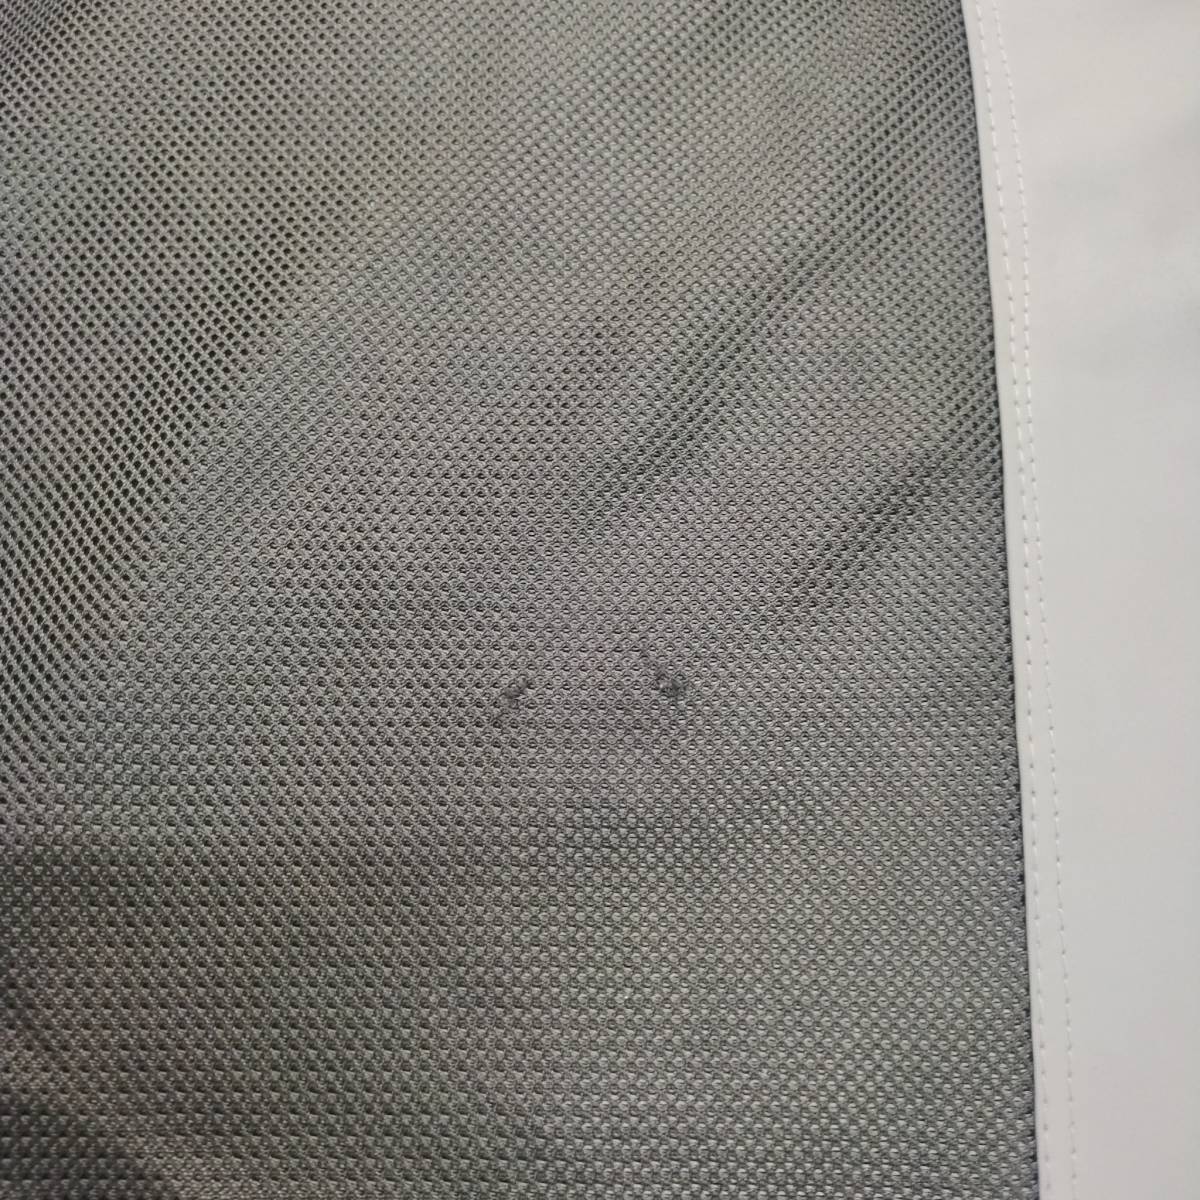 (AM-2569)[ used air mat ] cape air mass ta- big cell Infinity CR-557(900S) disinfection washing ending nursing articles 